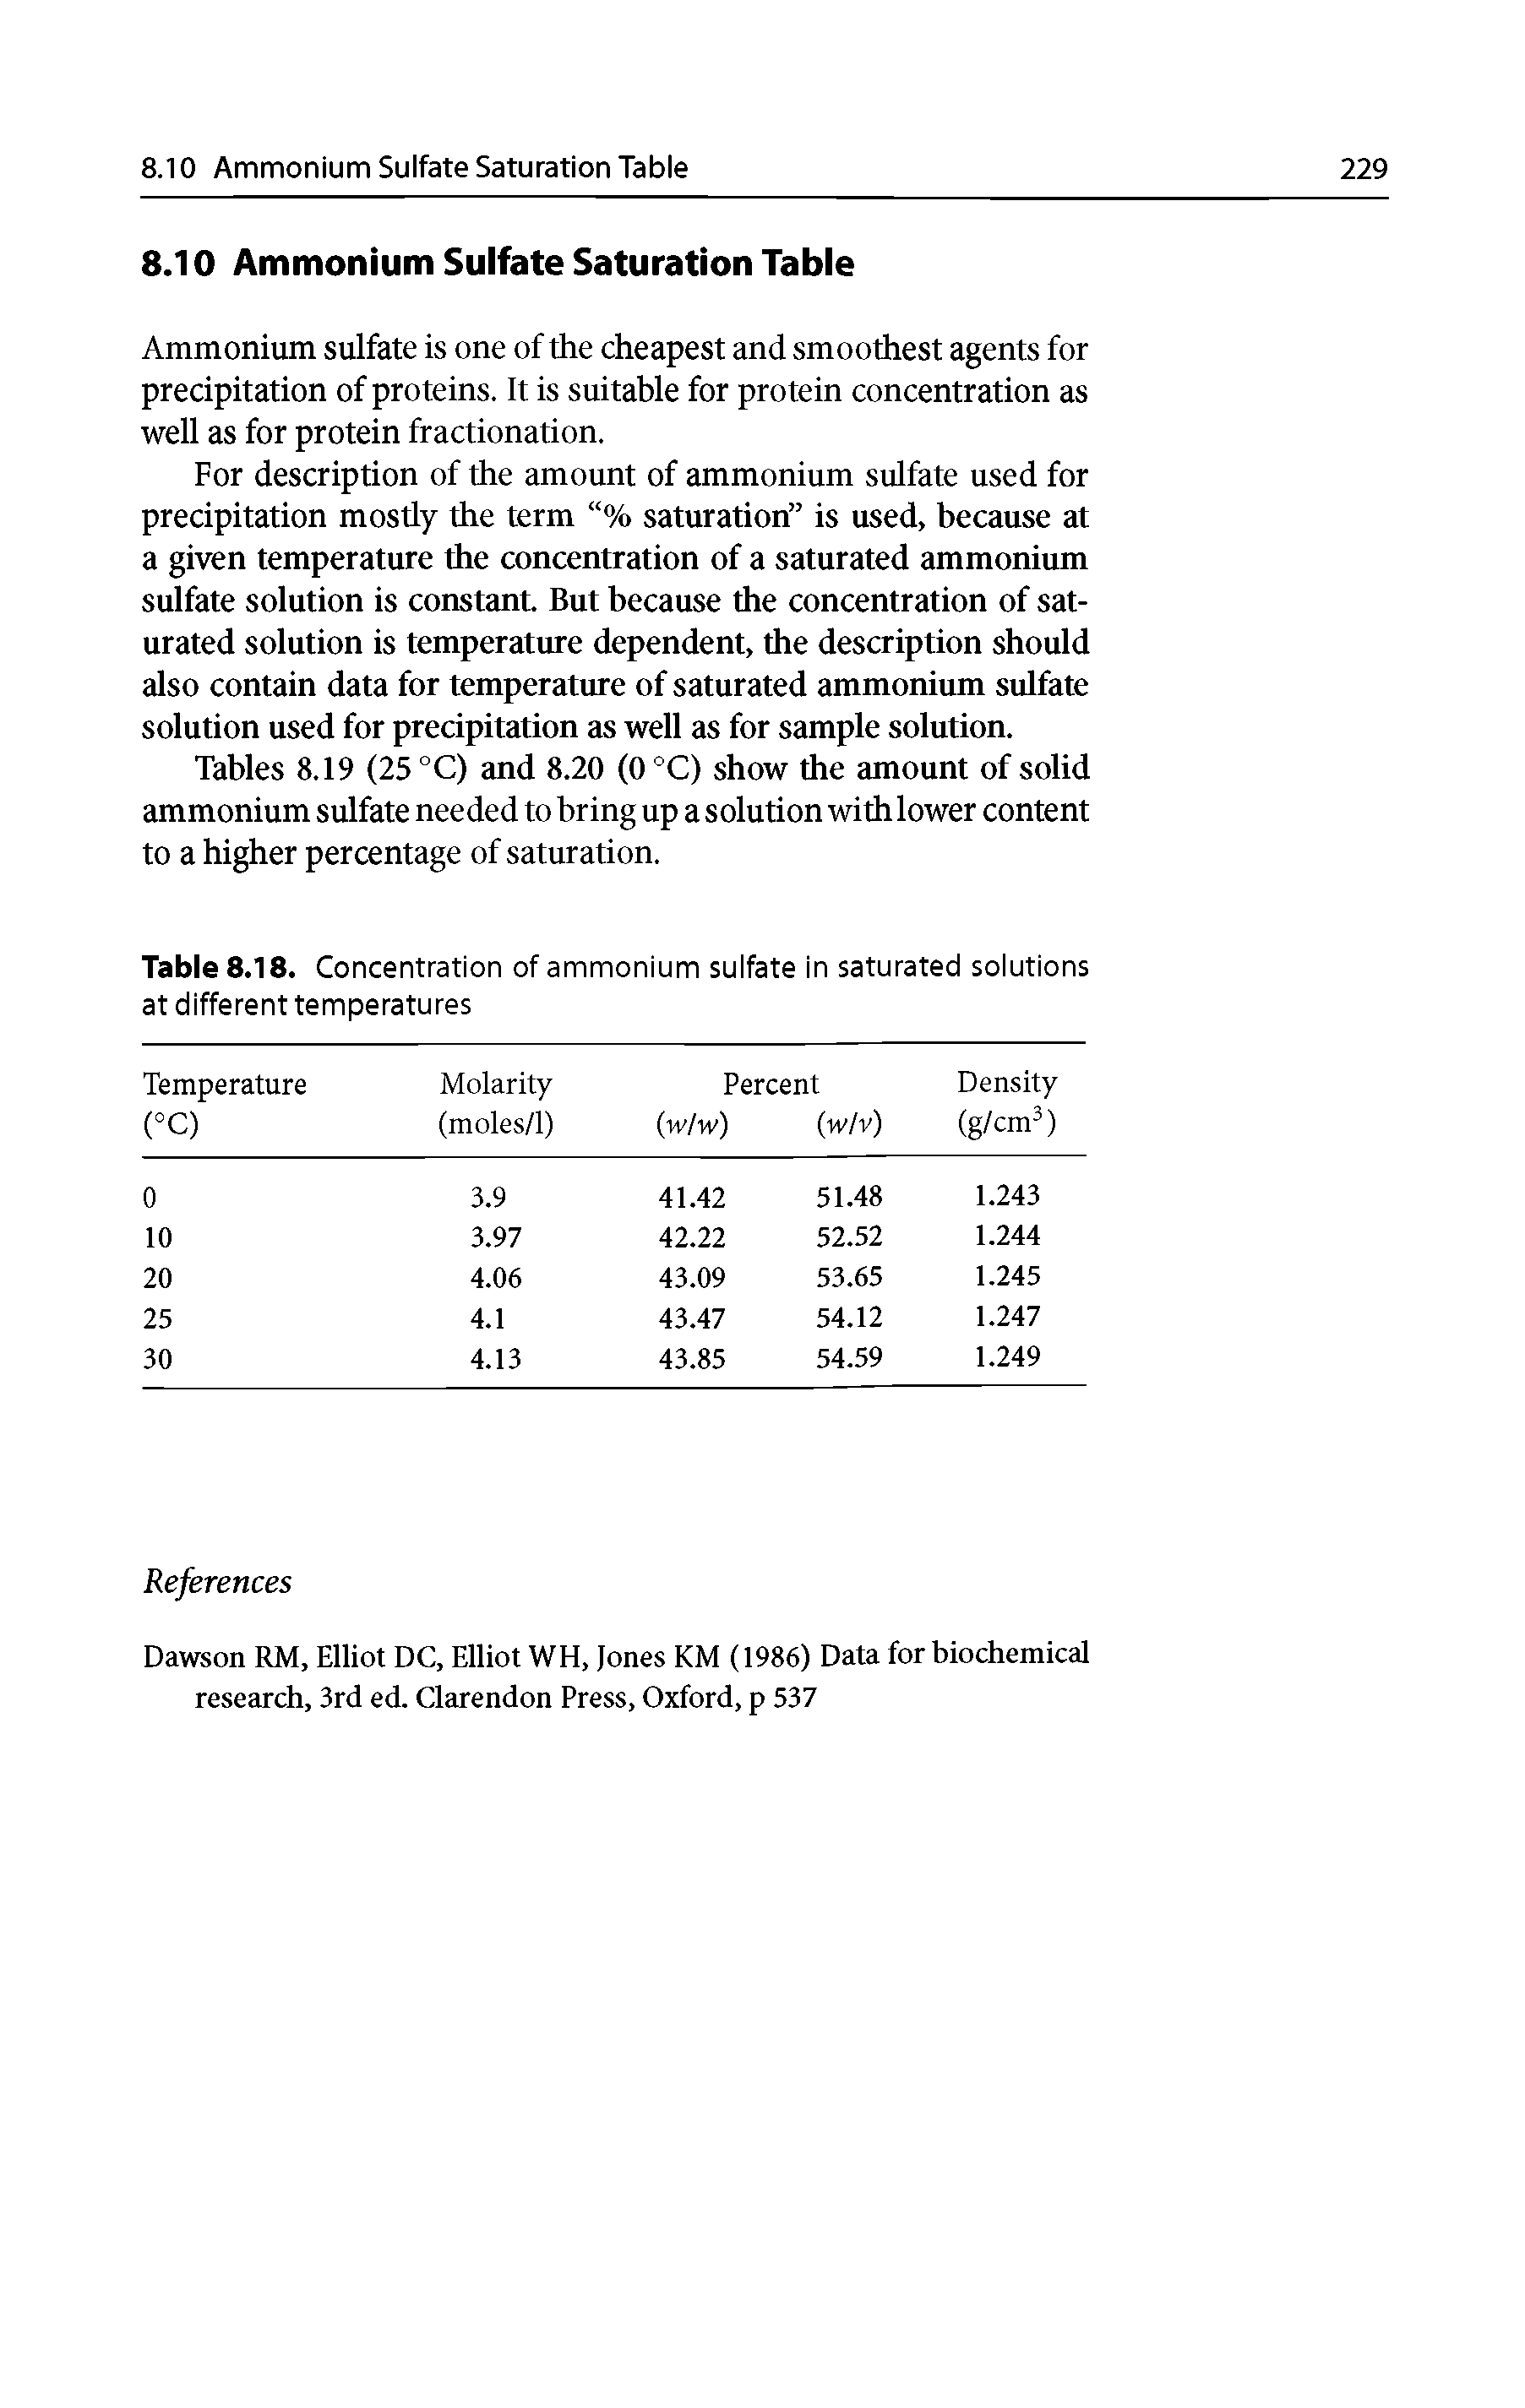 Tables 8.19 (25 °C) and 8.20 (0 °C) show the amount of solid ammonium sulfate needed to bring up a solution with lower content to a higher percentage of saturation.